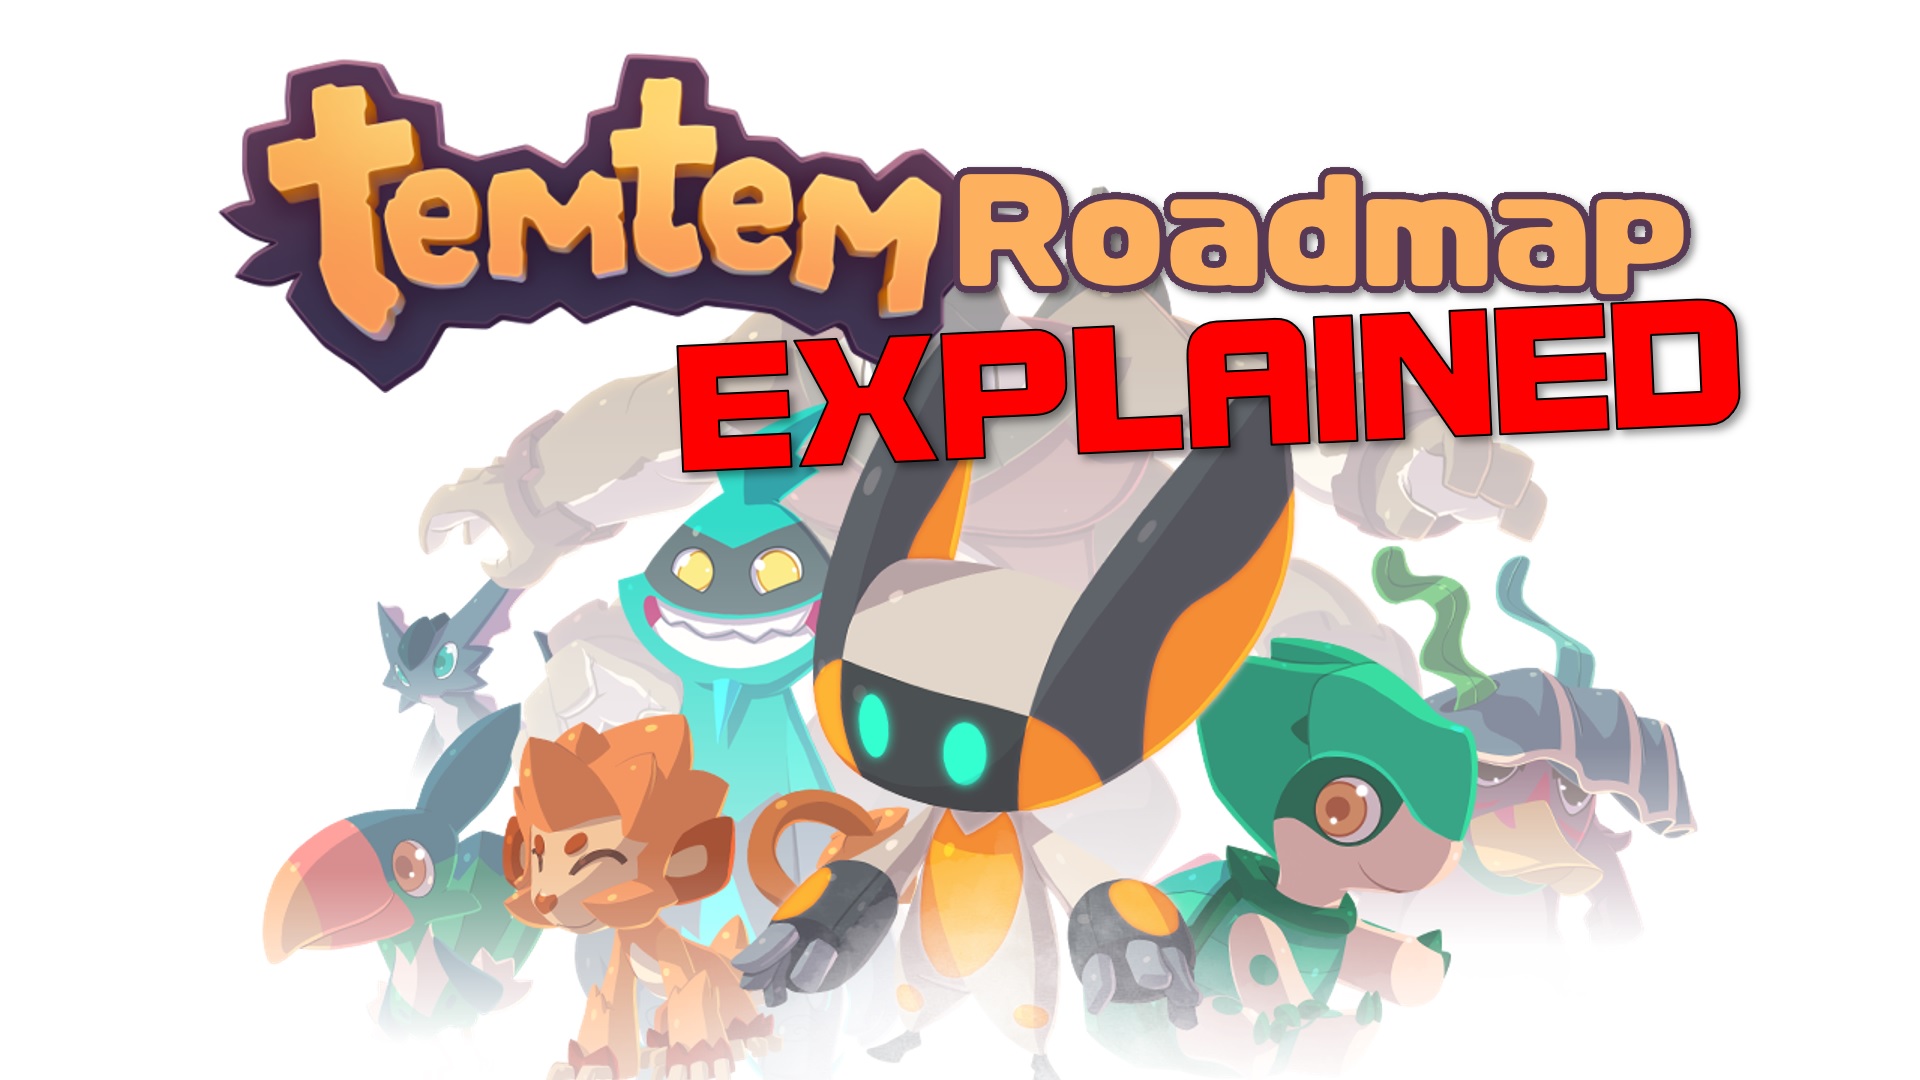 Temtem roadmap includes ranked, climbing gear, new Temtems, and plans for more Gamepur